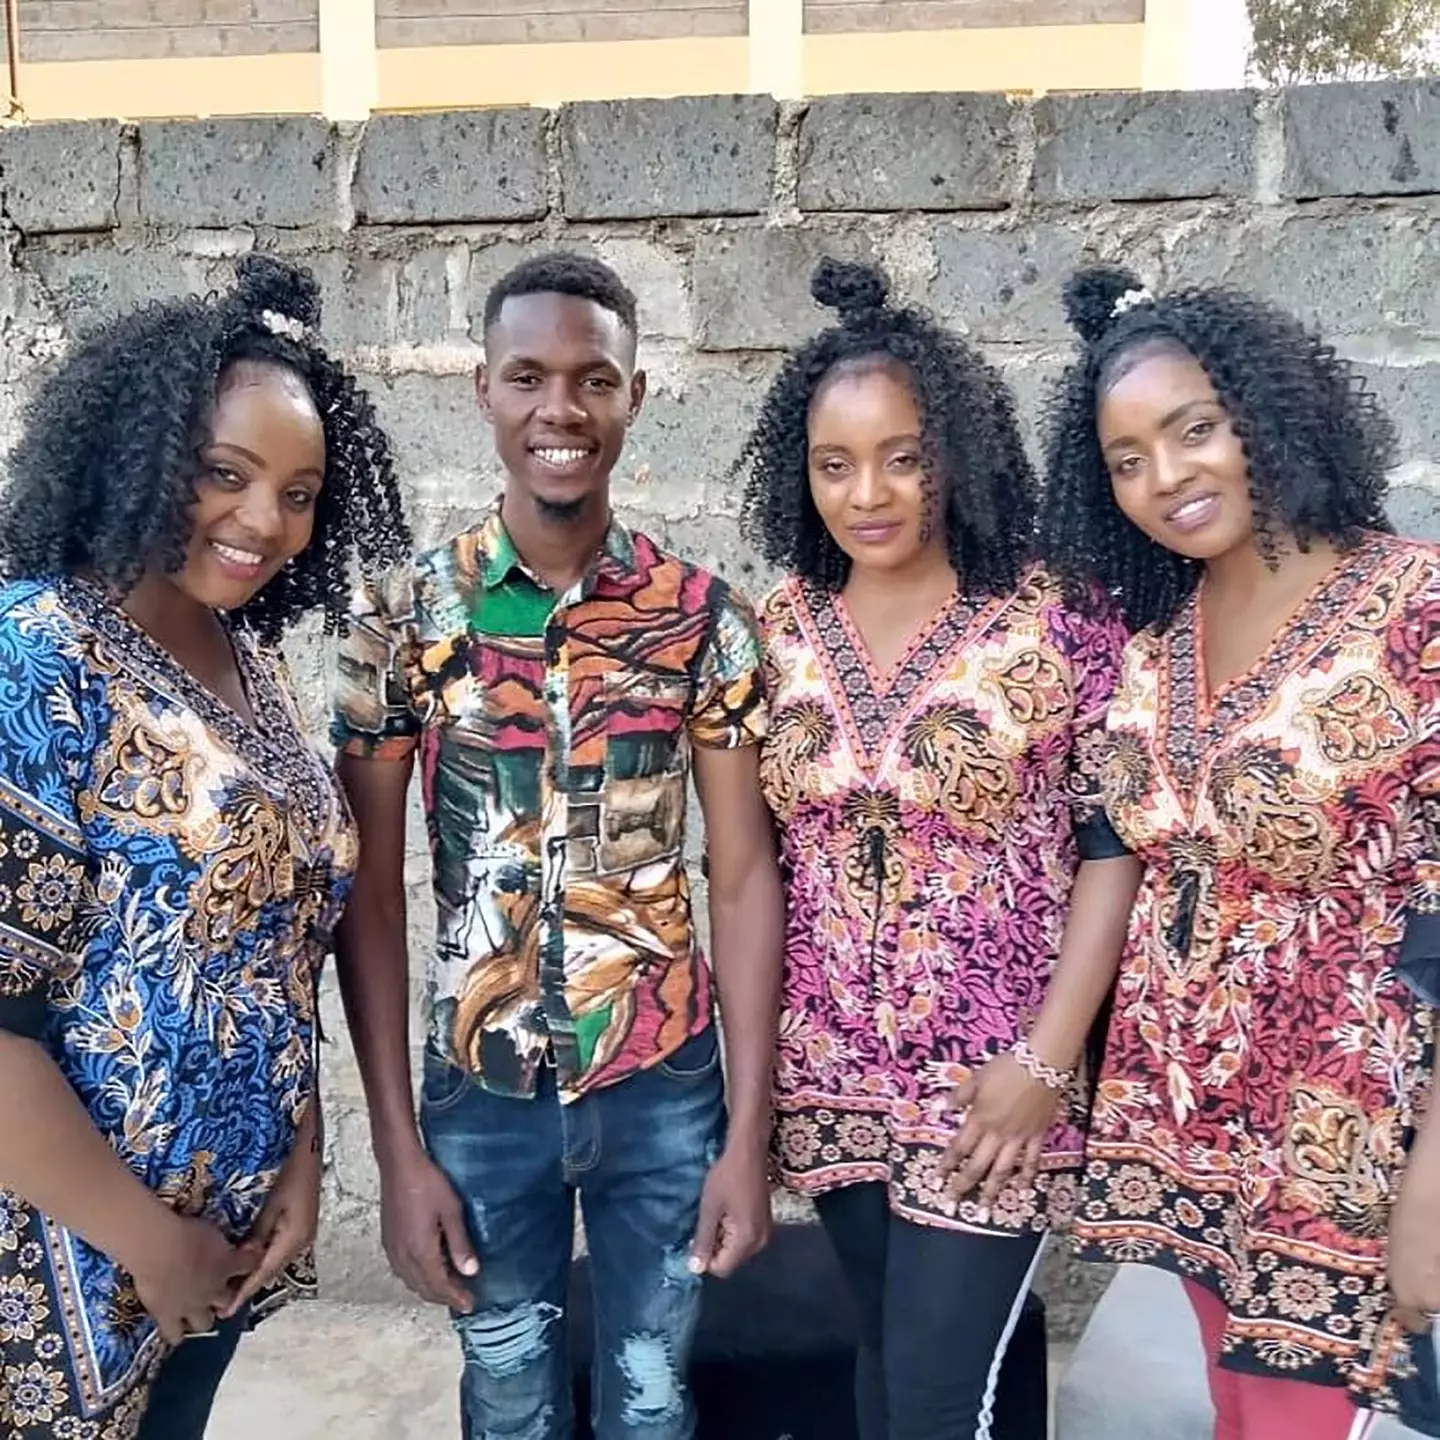 Stevo is planning to marry triplets.